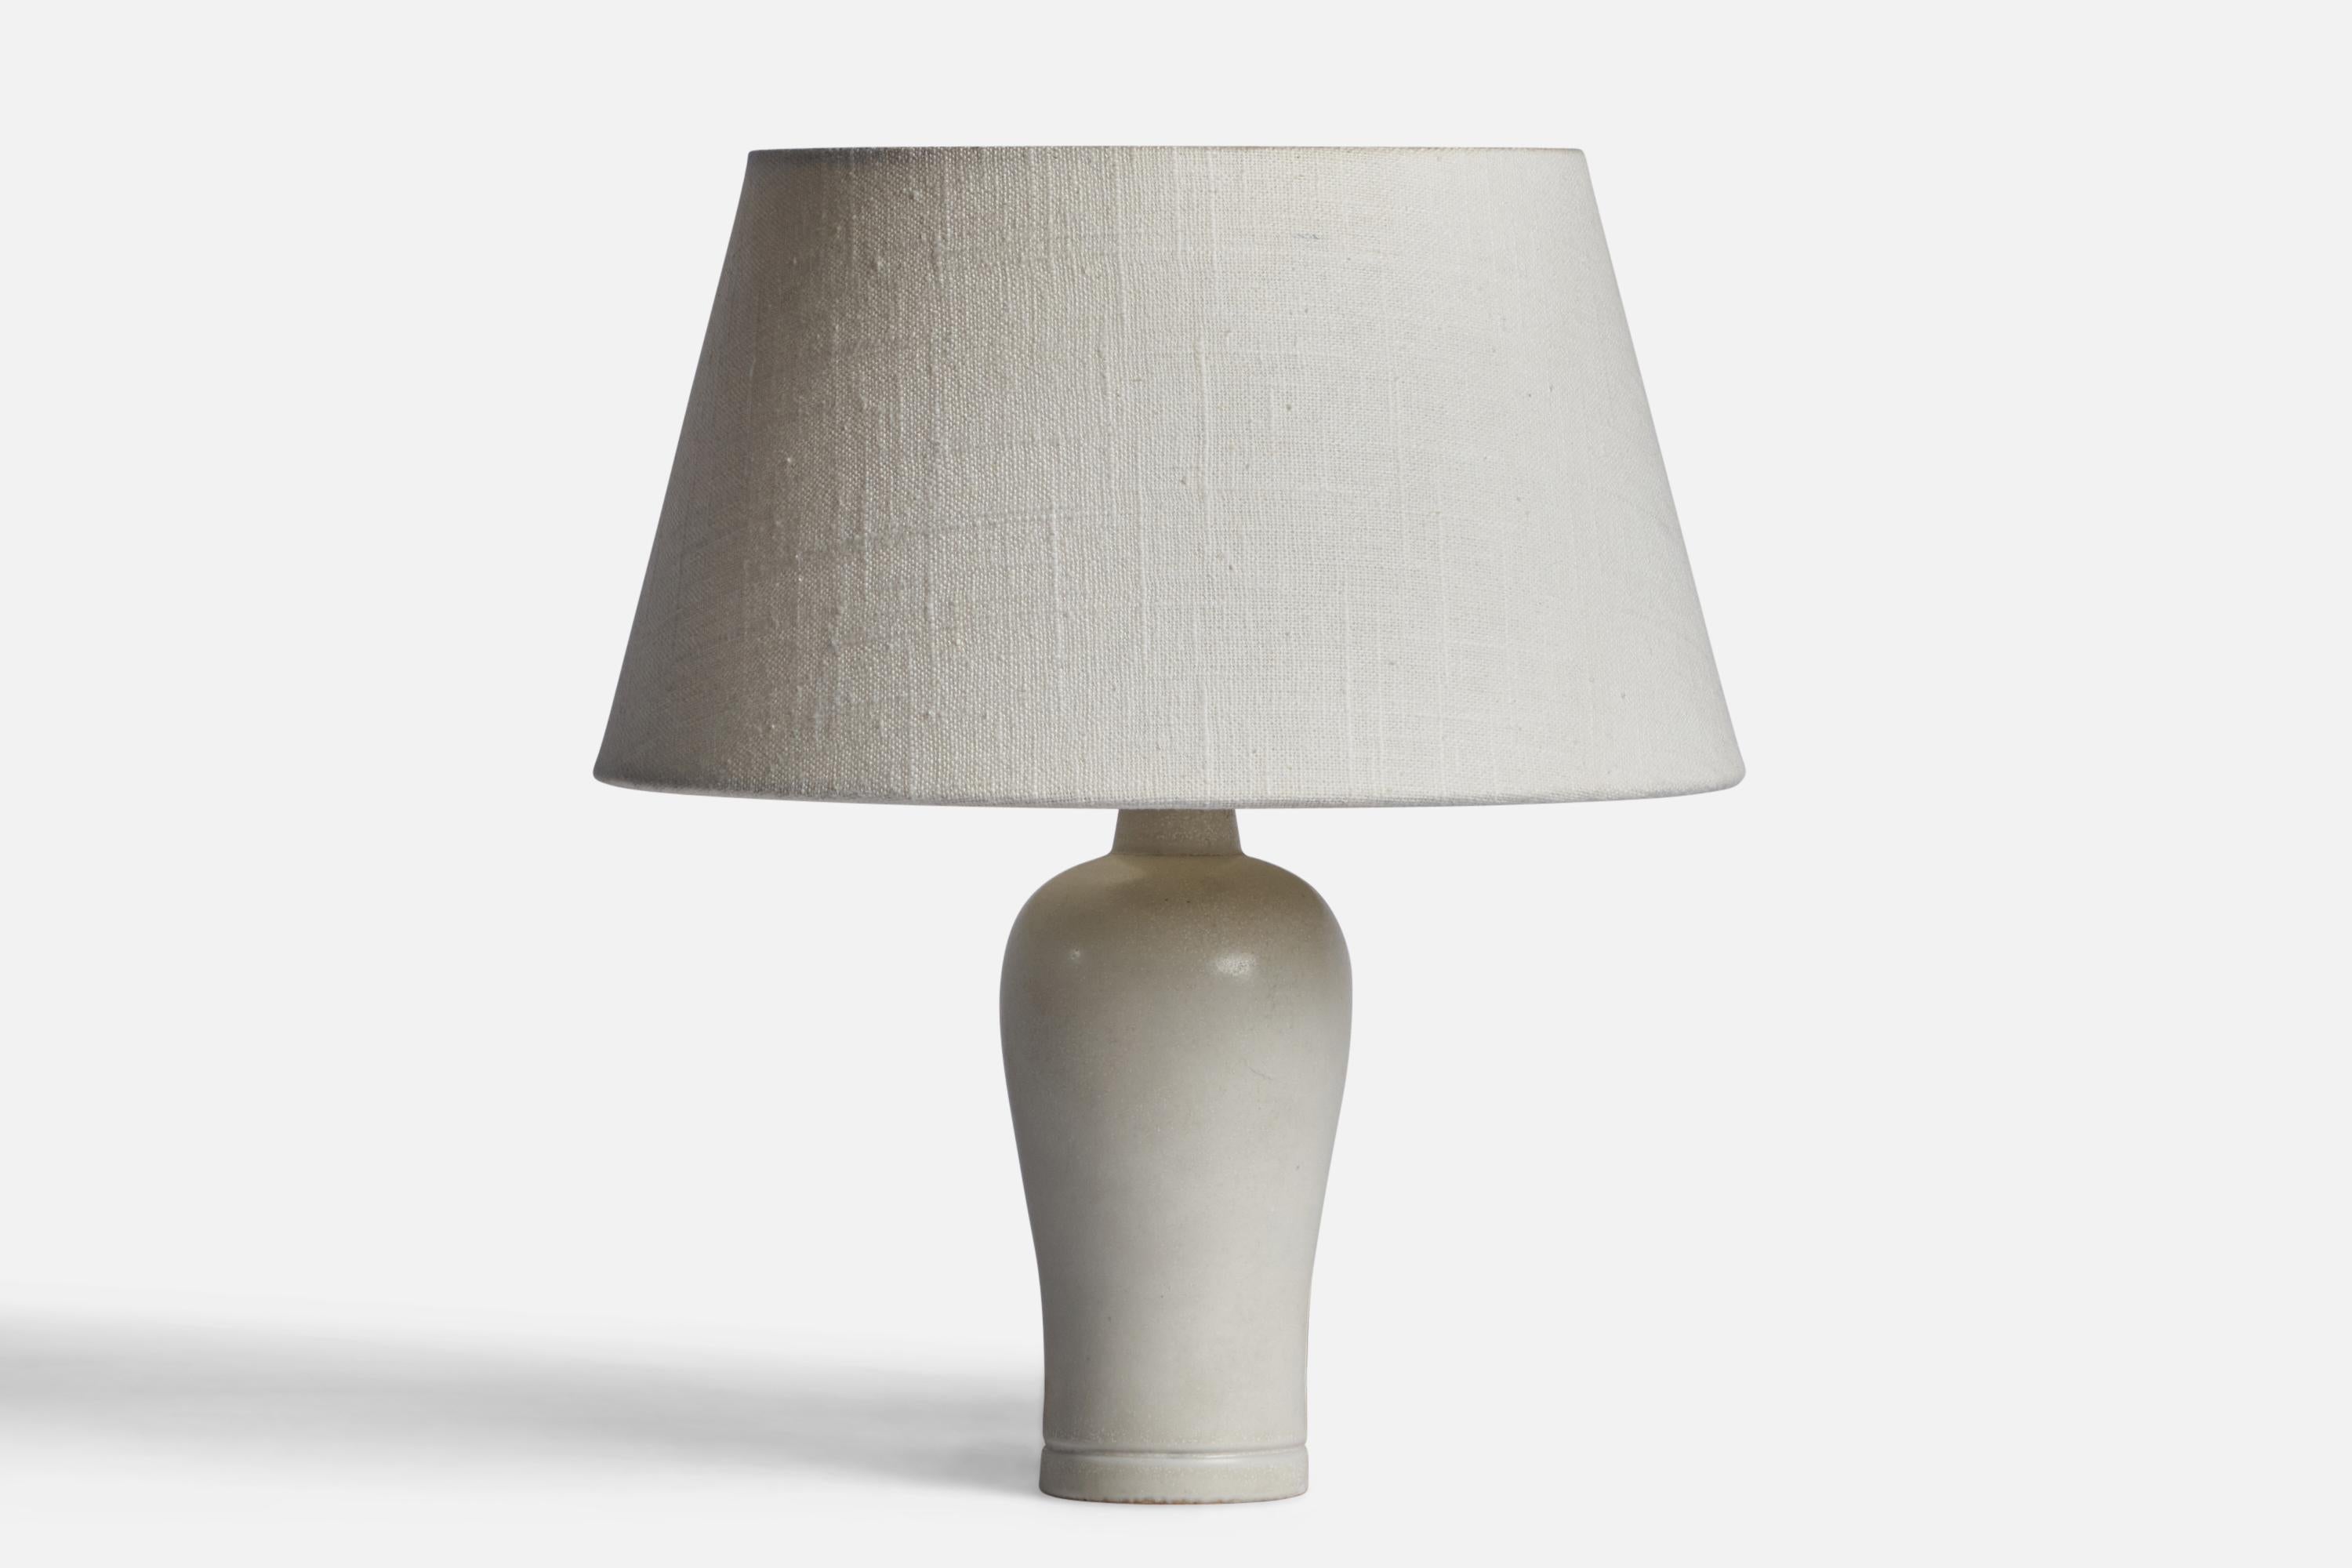 An off-white glazed stoneware table lamp designed by Gunnar Nylund and produced by Rörstrand, Sweden, 1940s.

Dimensions of Lamp (inches): 8.5” H x 3” Diameter
Dimensions of Shade (inches): 7” Top Diameter x 10” Bottom Diameter x 5.5” H 
Dimensions